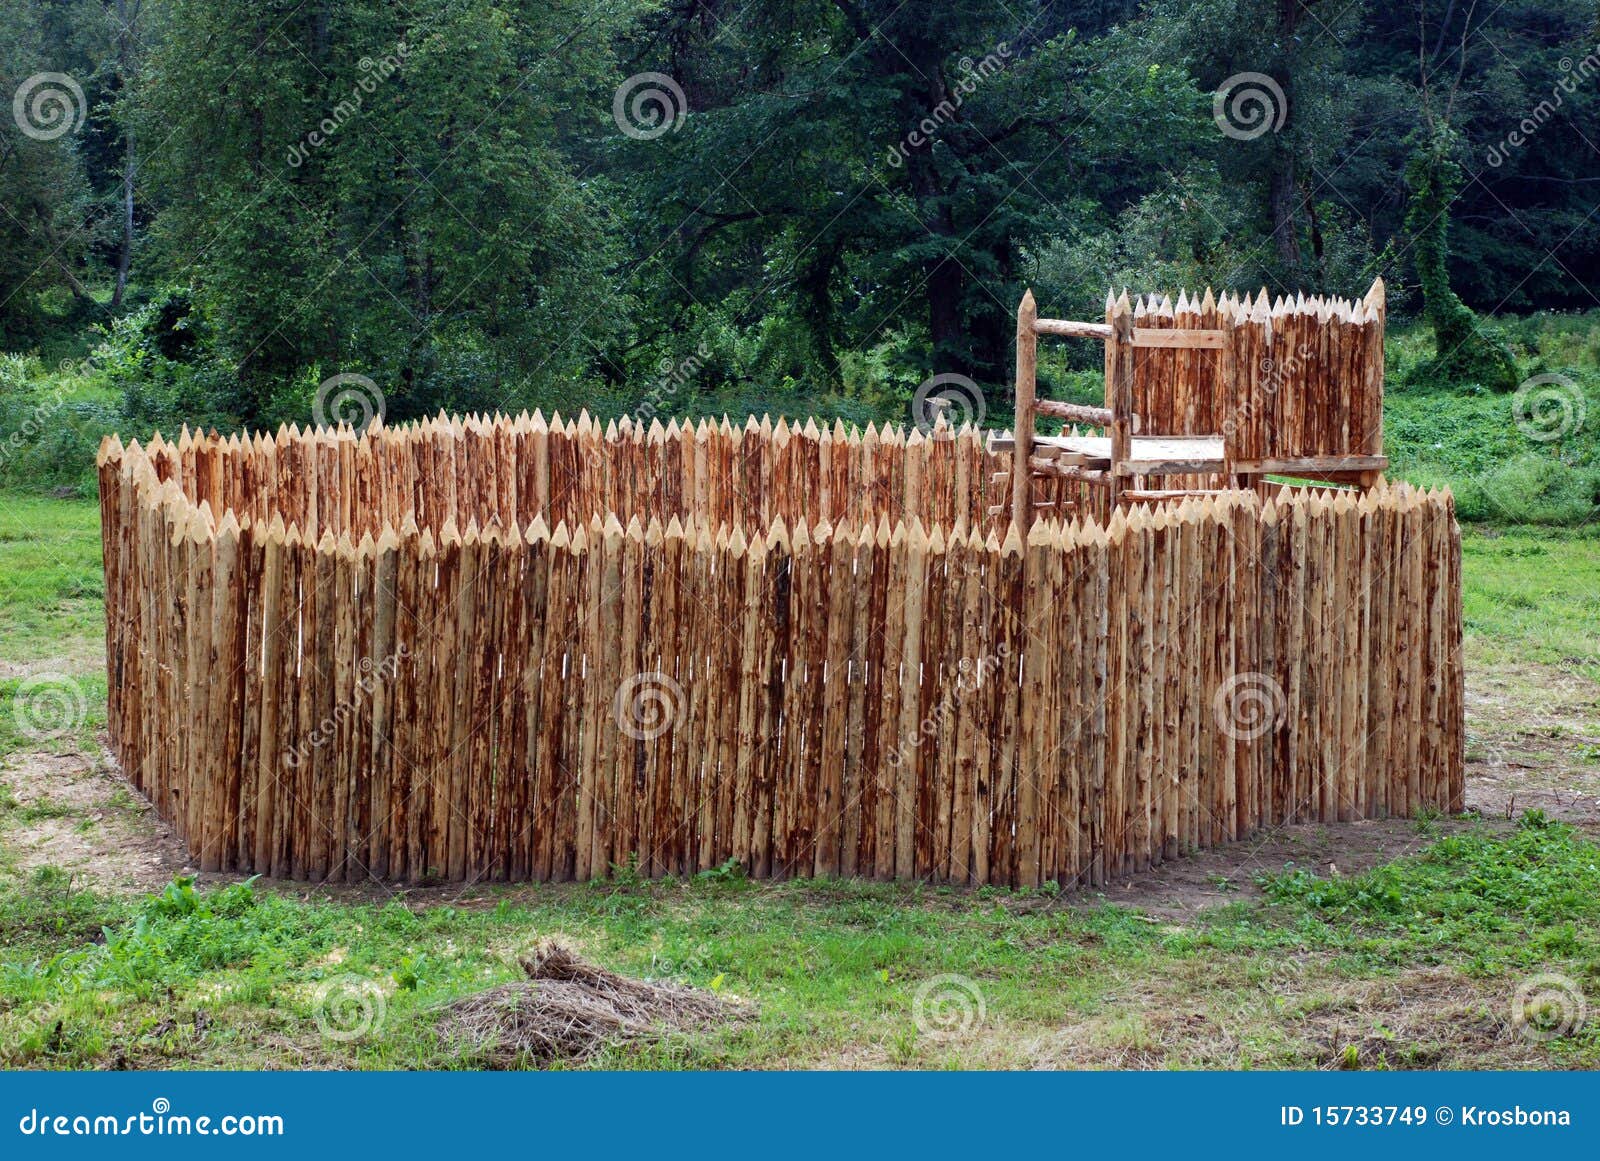 Wooden Fort Royalty Free Stock Images - Image: 15733749